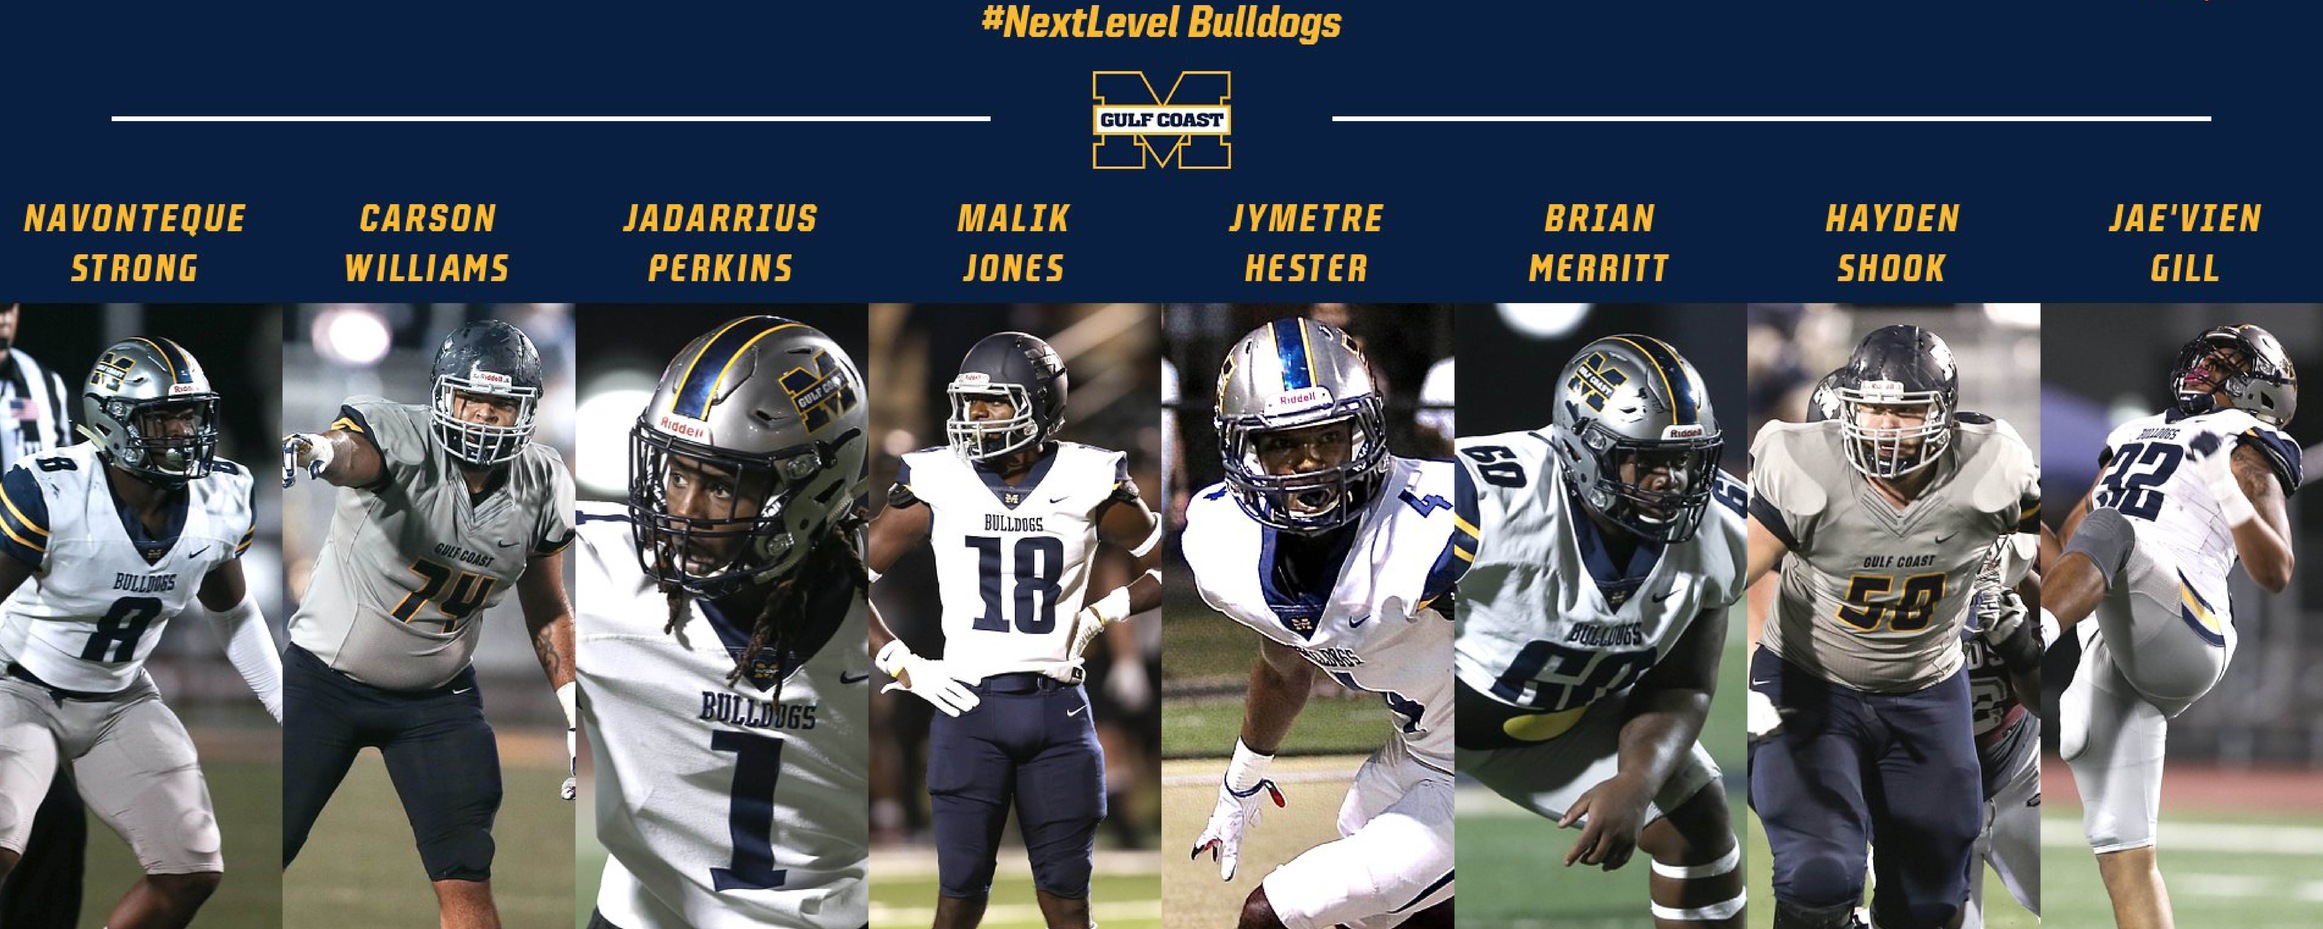 MGCCC sending more to the #NextLevel